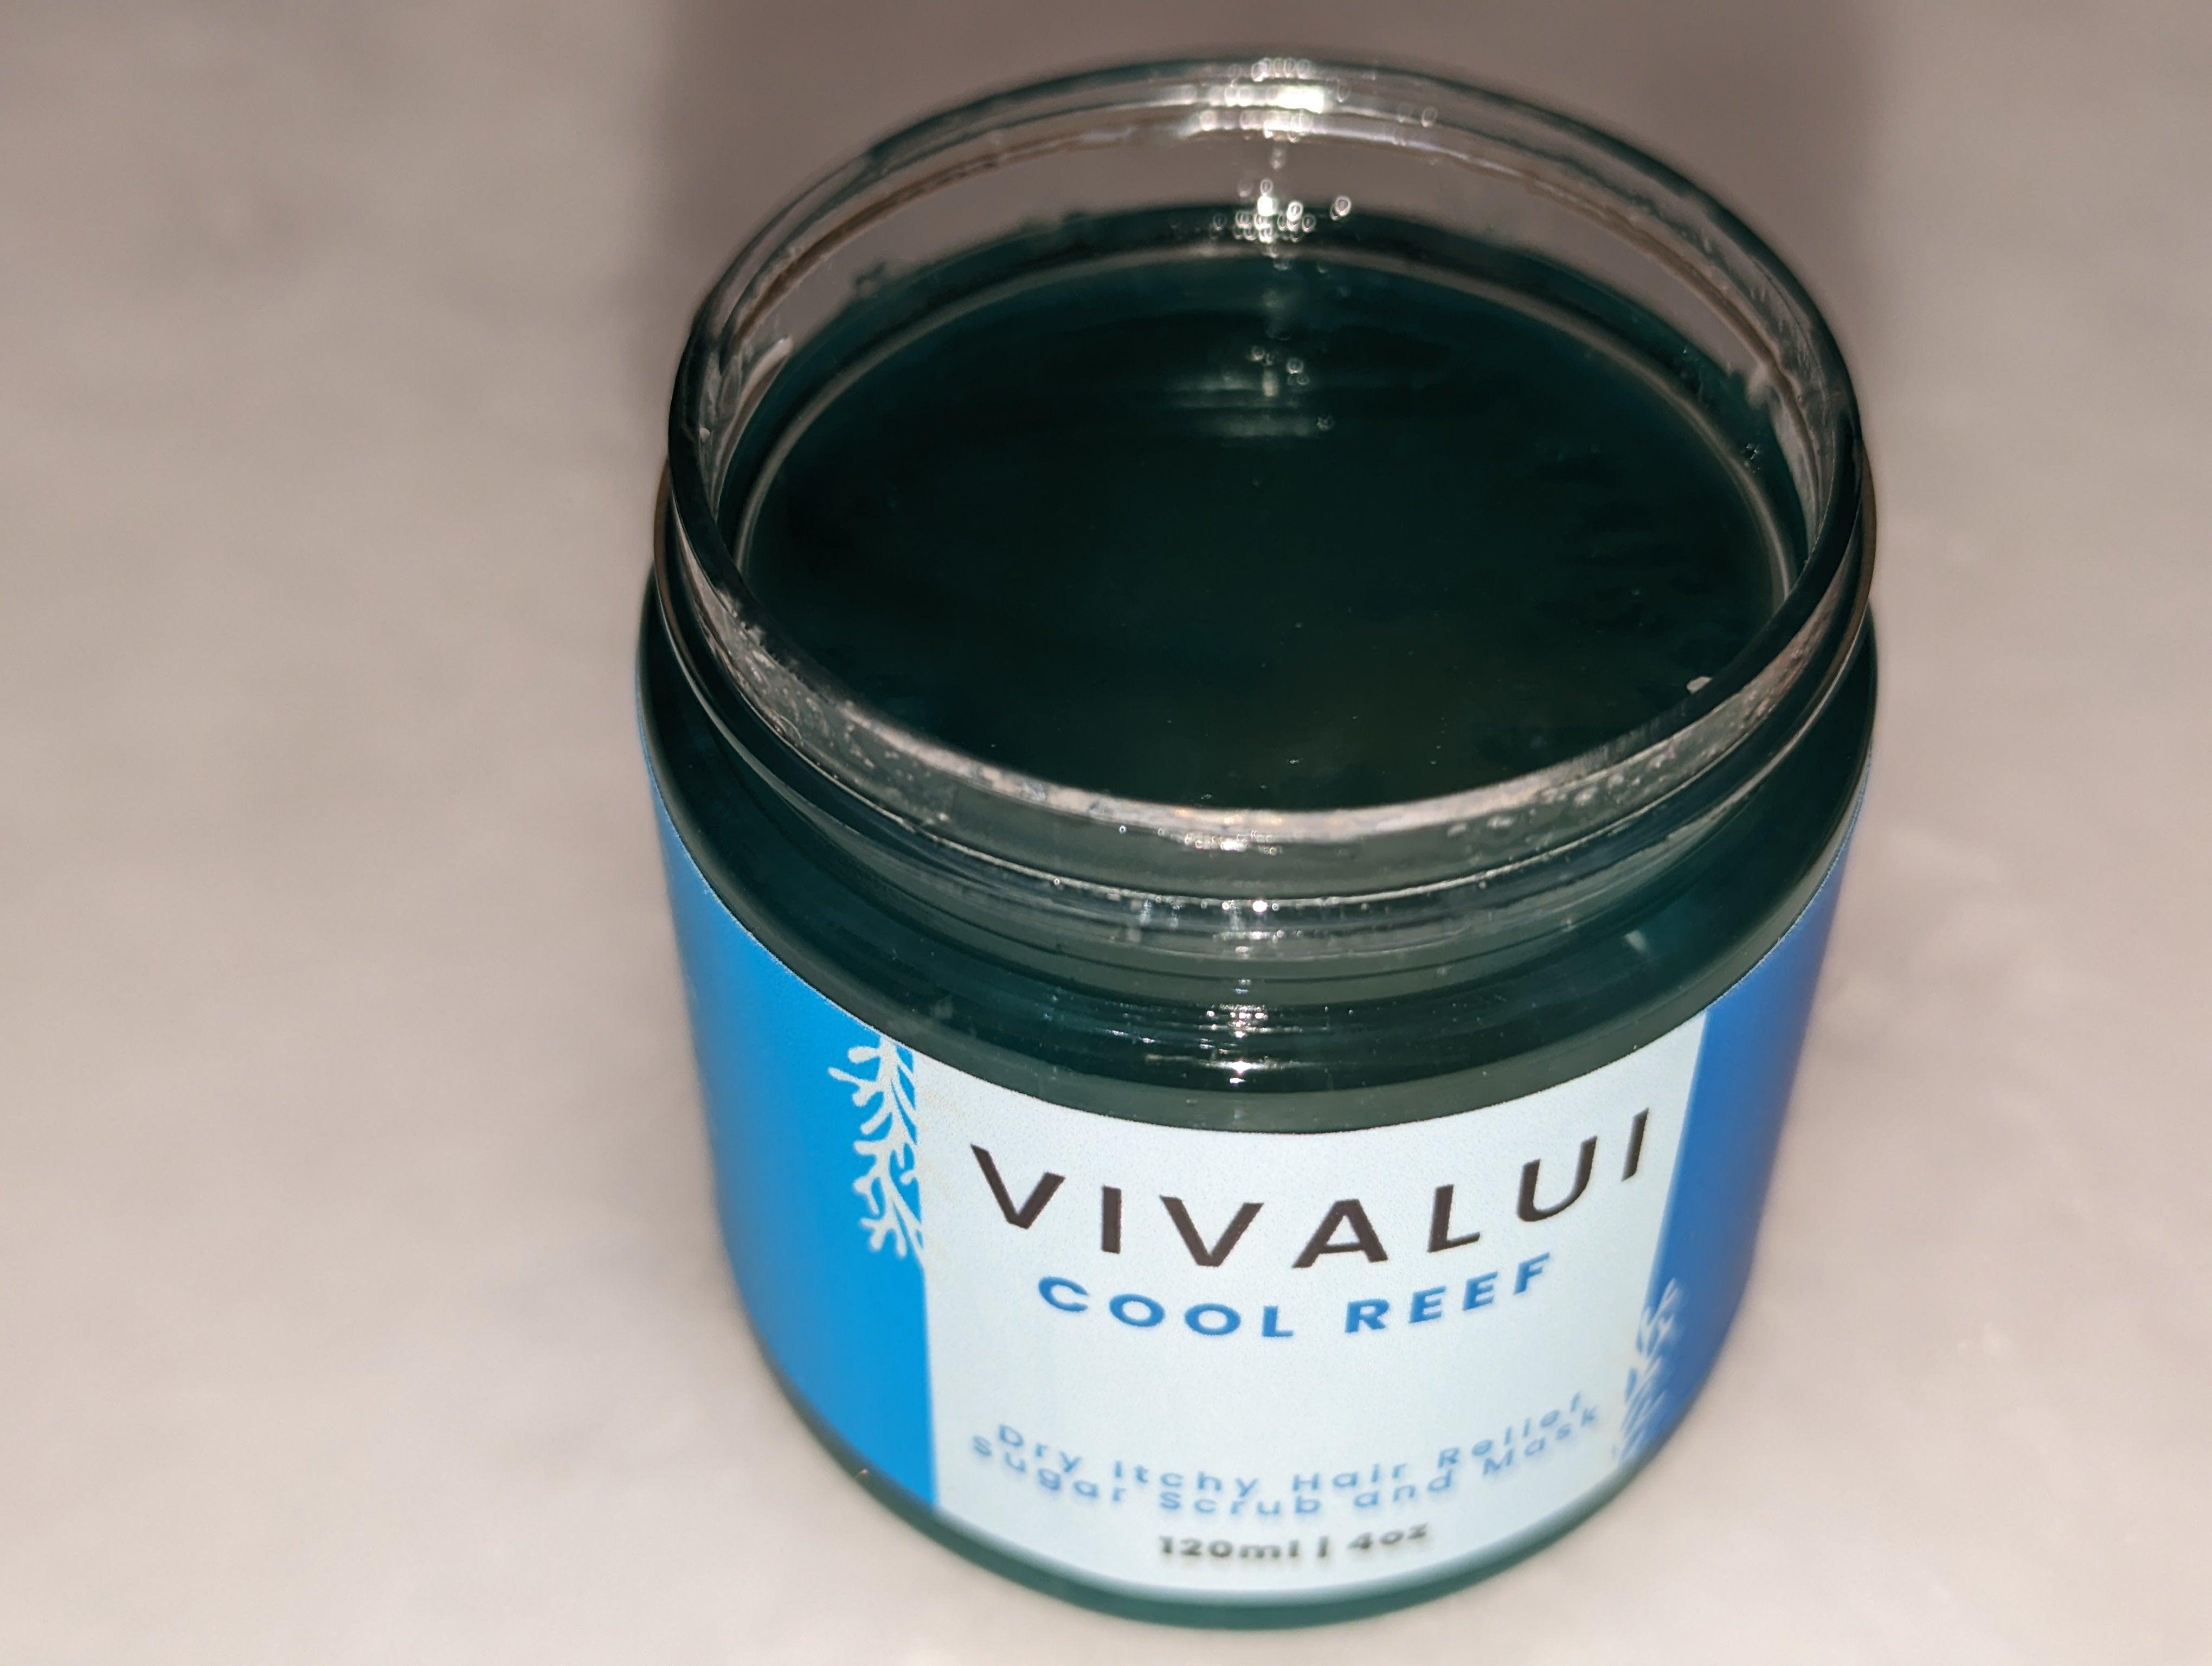 Vivalui cool reef dry itchy hair and scalp relief sugar scrub and mask